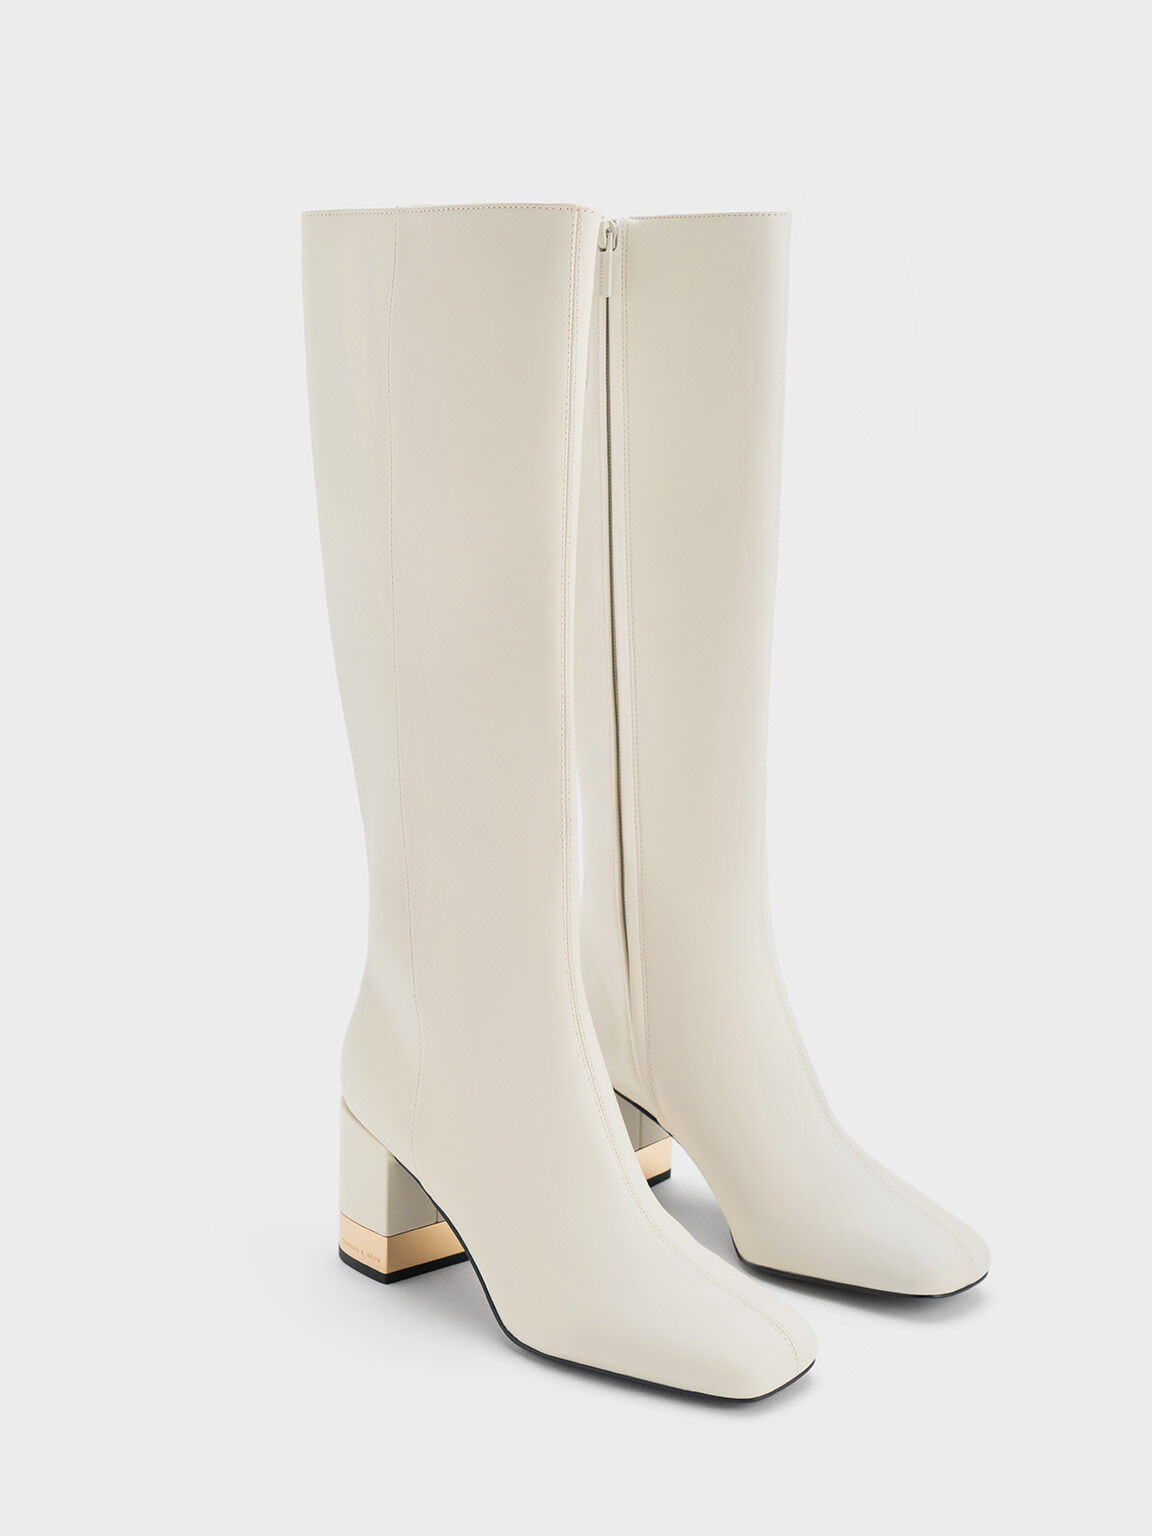 Charles & Keith - Women's Knee High Flat Boots, Chalk, US 8